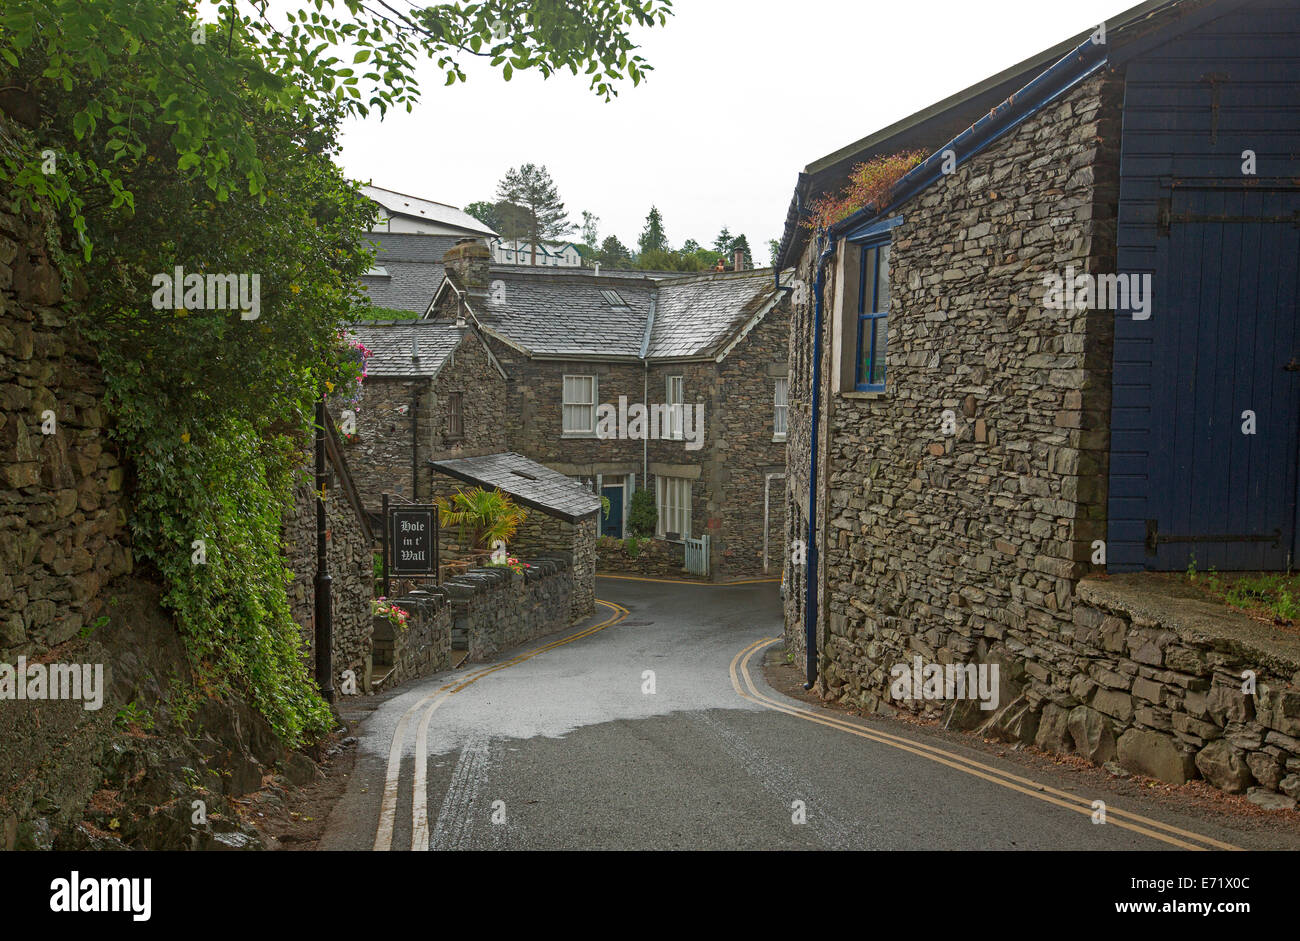 Narrow road winding between historic stone buildings in old English village near Windemere, Lake District, Cumbria, England Stock Photo